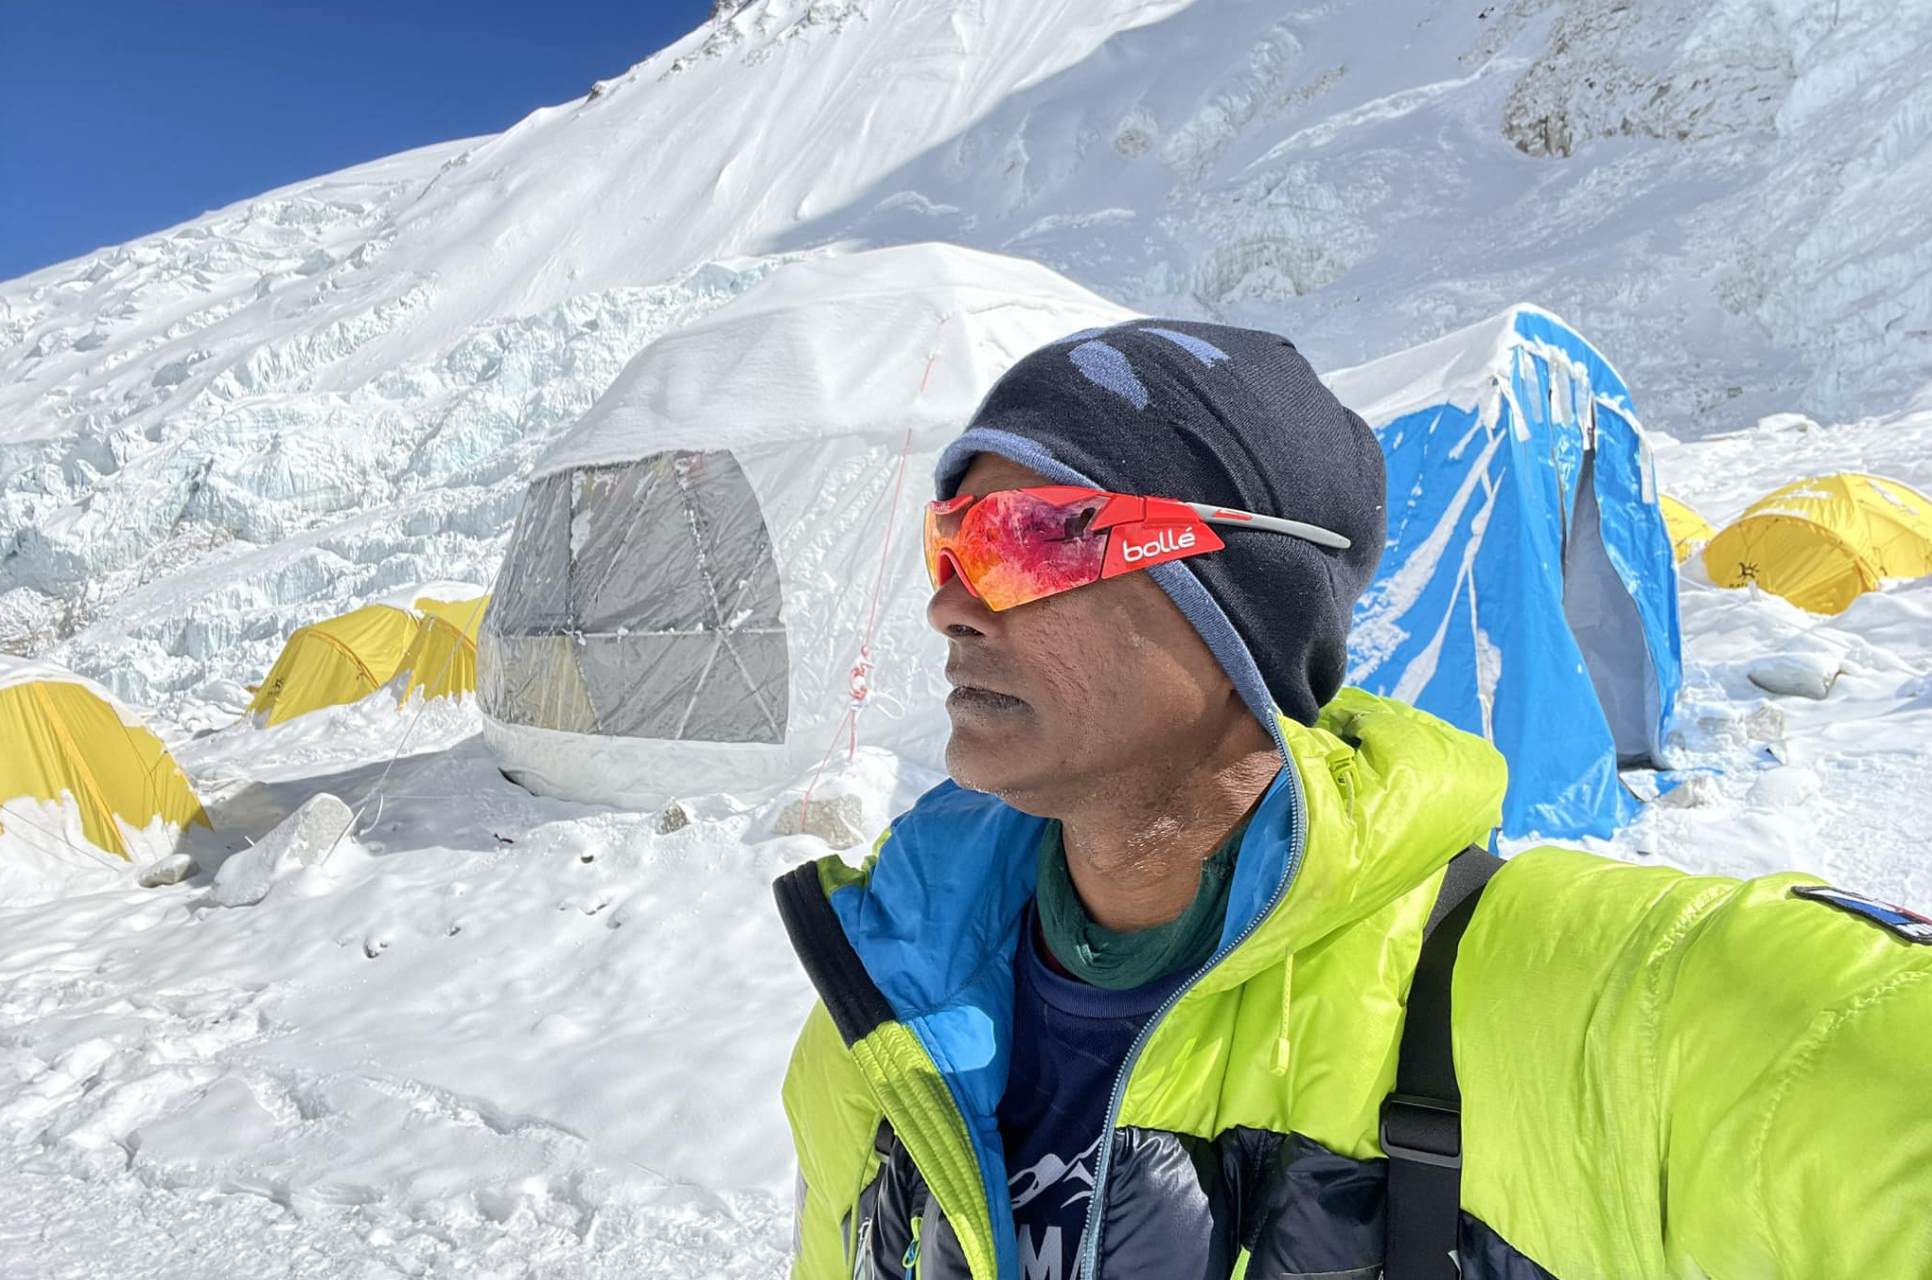 Rescued Climber Faces Major Backlash After Failing To Thank The Man Who Saved His Life On Everest